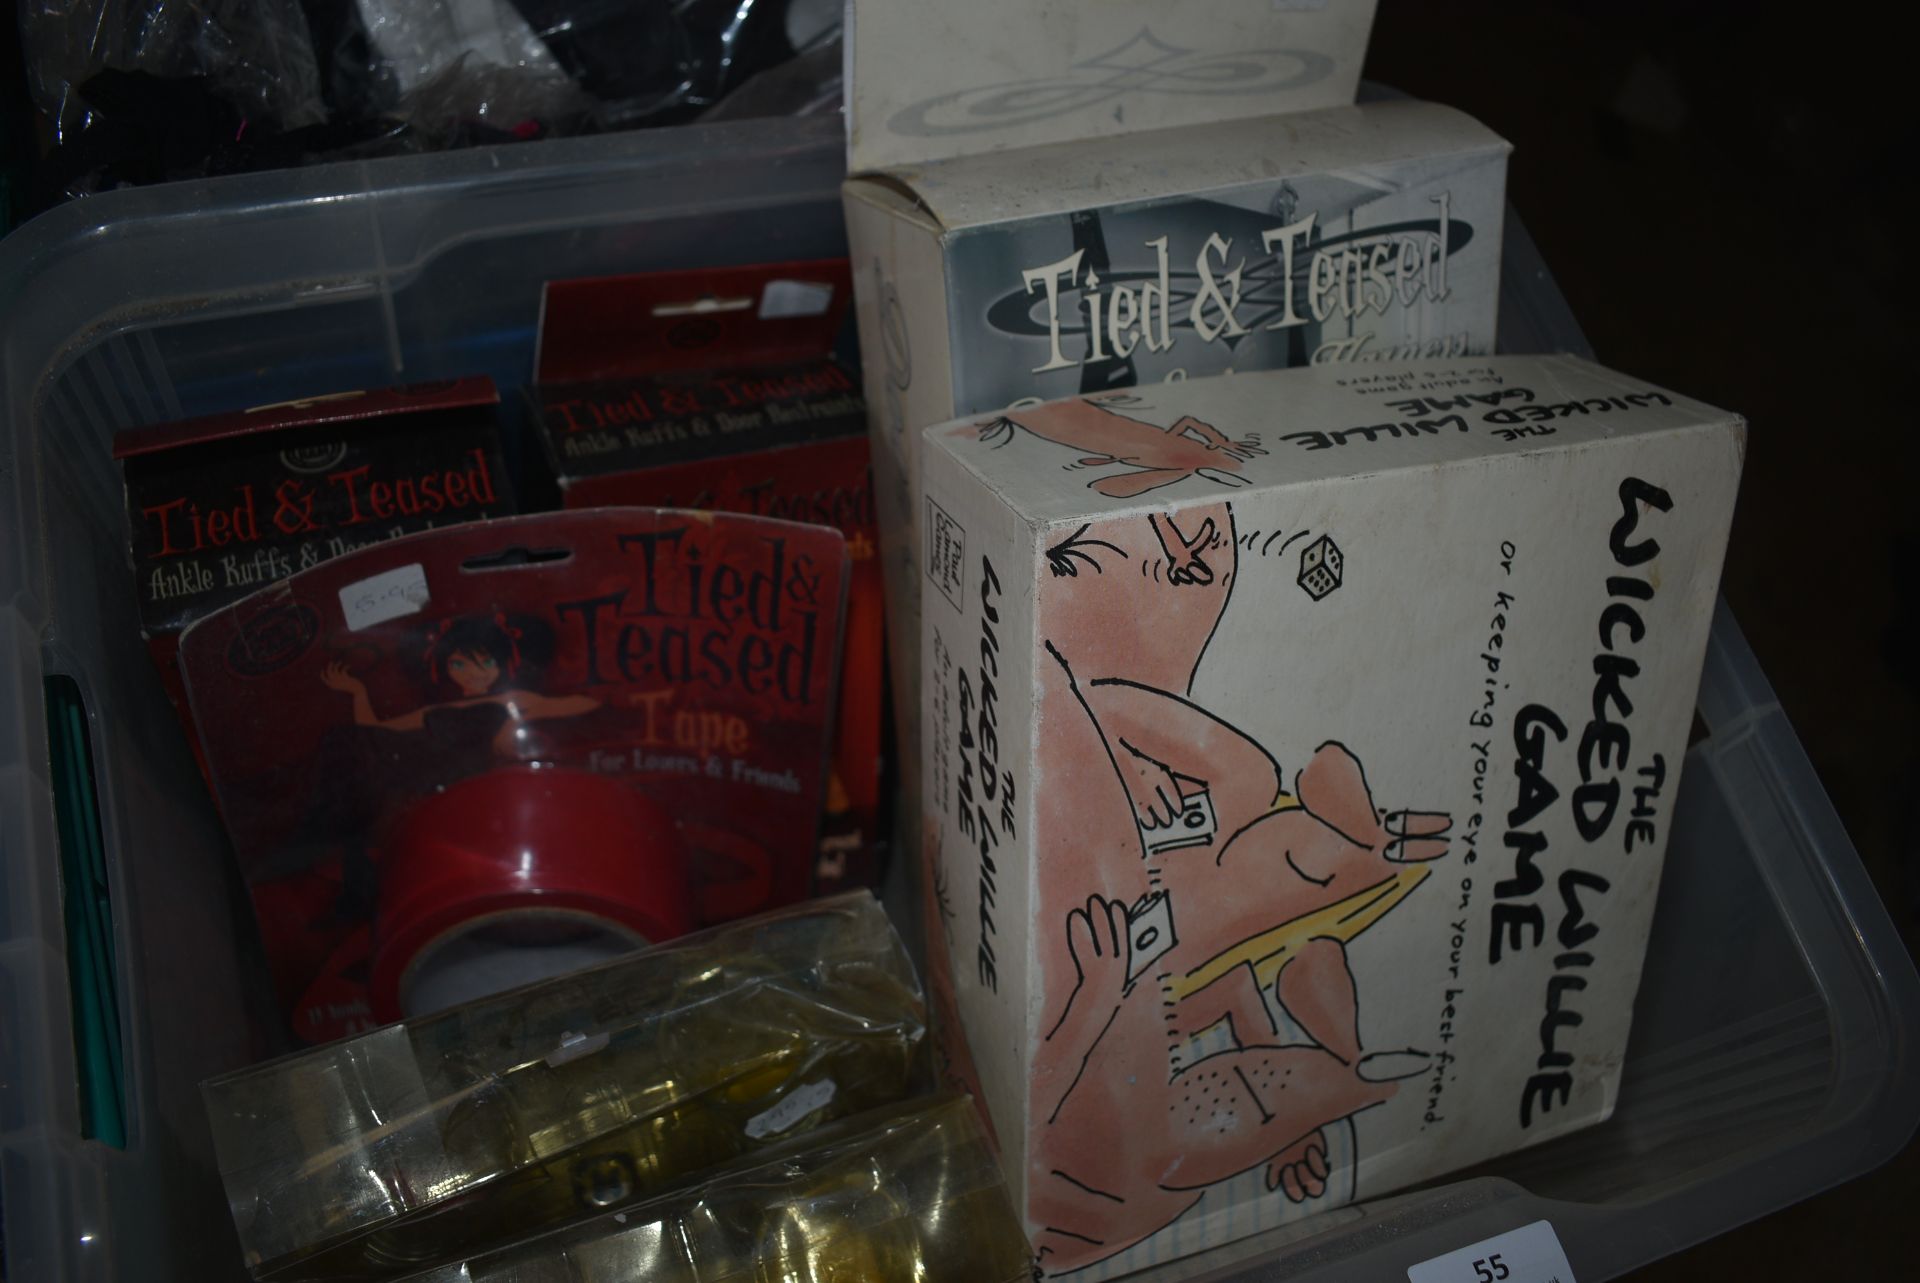 Quantity of Erotic Toys, and Shot Glasses (tray not included) (Must be 18+ to bid)